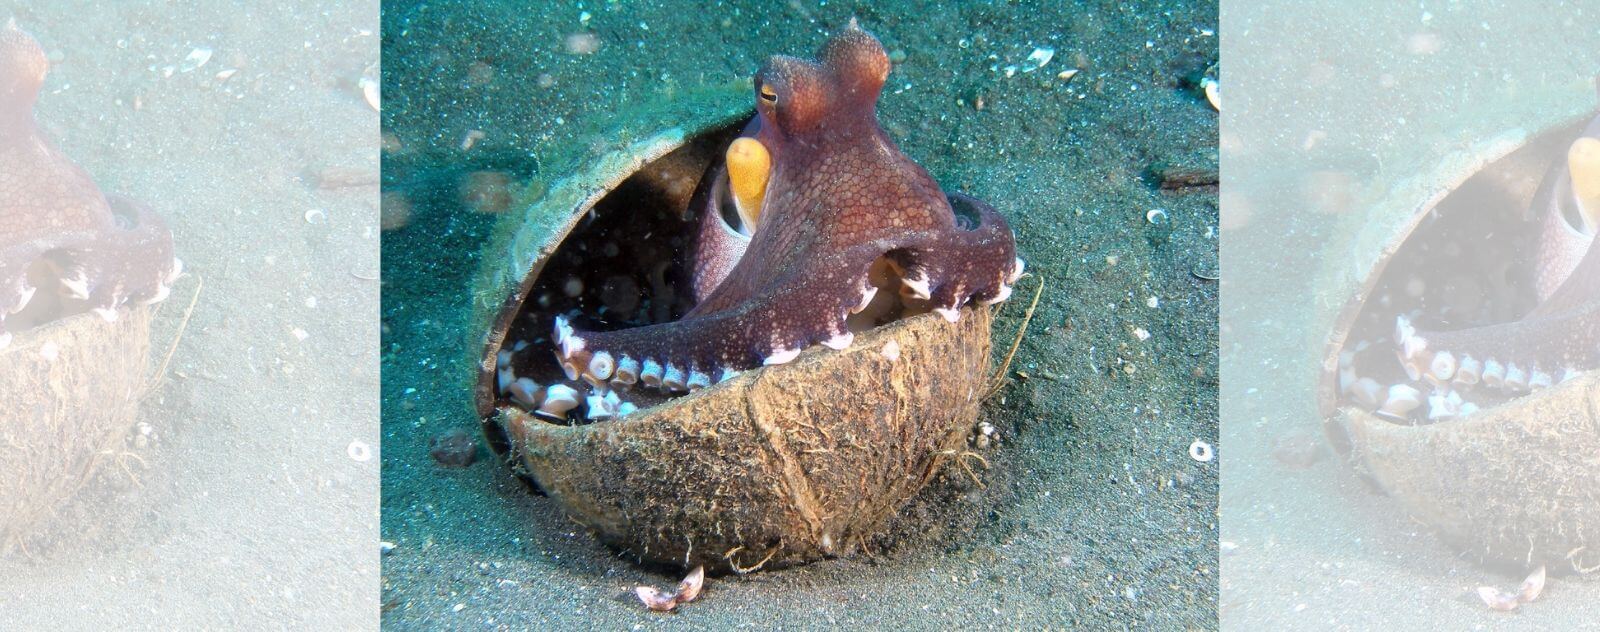 Veined Octopus in a Coconut